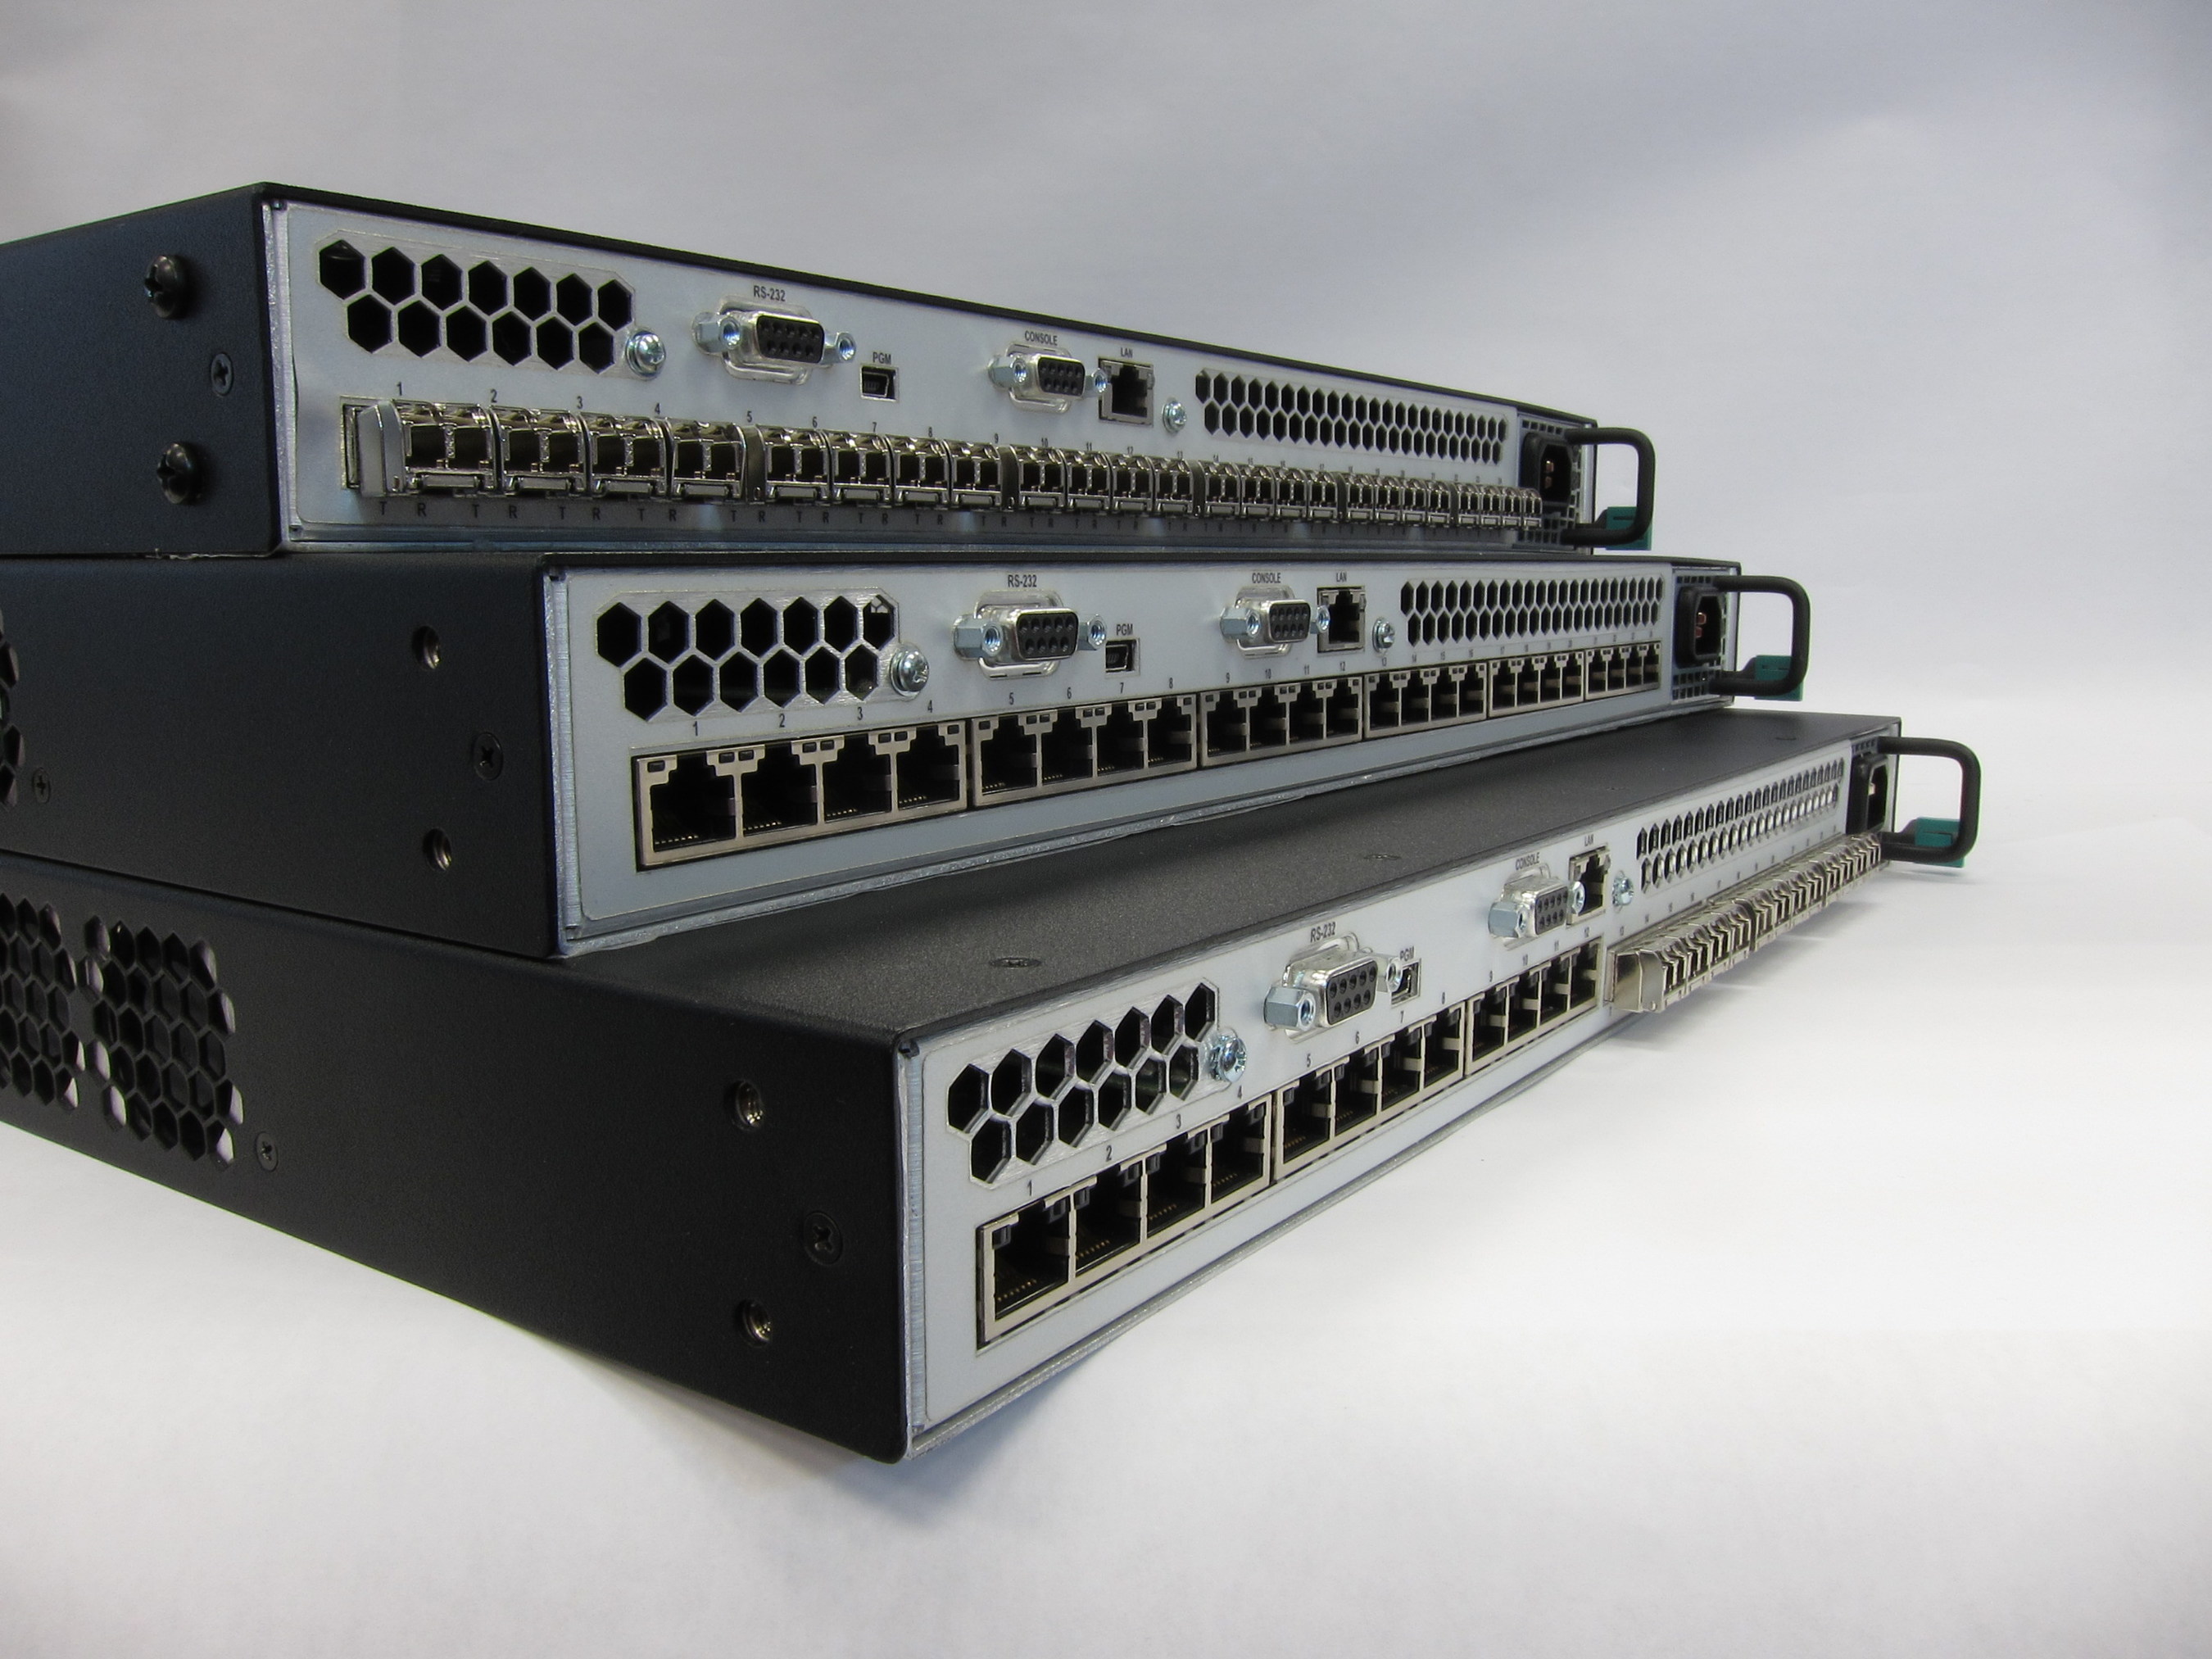 The TLX24 is a 1RU matrix and is available with fiber-optic, CATx and hybrid connectivity options, and may be configured as a unidirectional 24x24 or a bidirectional 12x12 switch. With a protocol-agnostic architecture, virtually any signal -- regardless of type or standard -- can be switched through the TLX24, and any port on the matrix can be quickly configured to accommodate any signal format or direction, in or out. It is easy to change any port on the TLX24 to be video or audio or machine-or-tablet control -- whatever configuration is required to accomplish a task -- in just minutes.